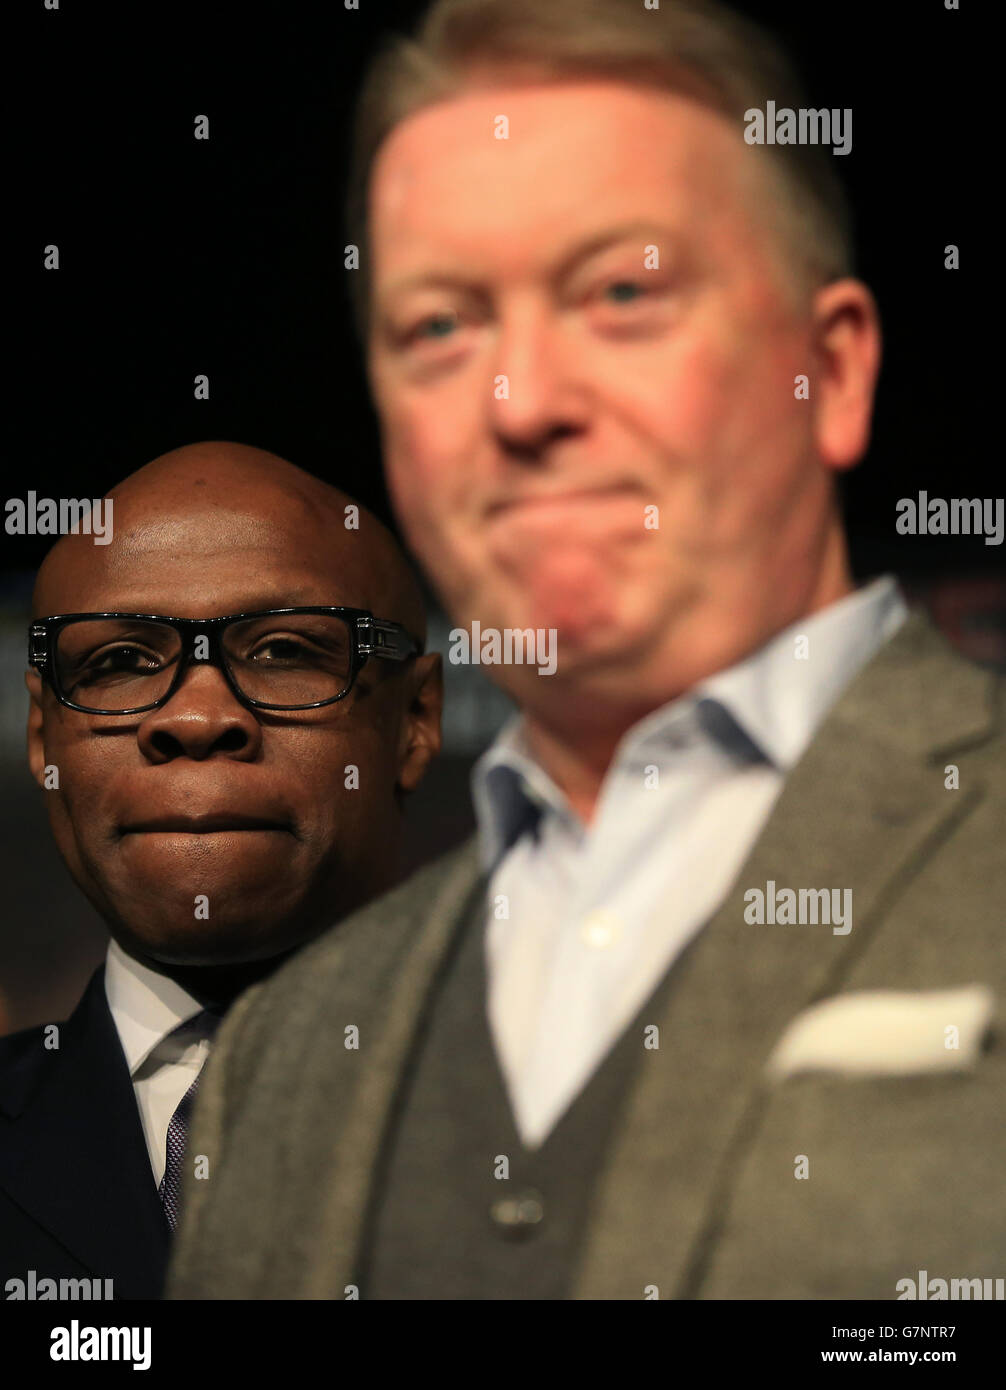 Chris Eubank (left) at weigh-in for his son Chris Eubank Junior with promoter Frank Warren (right) at The O2, London. Stock Photo